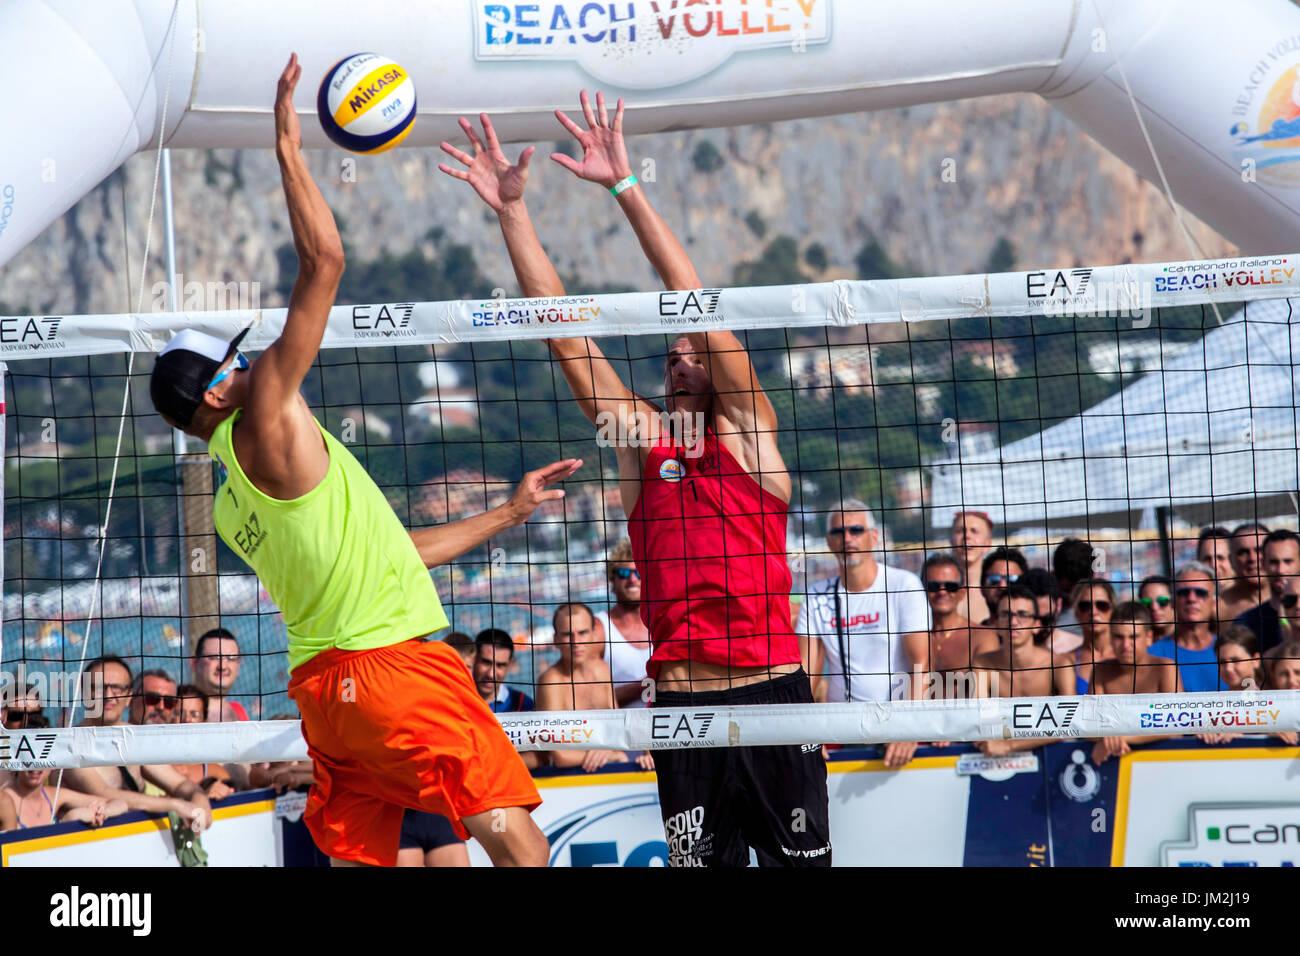 Athletes during the final of the Italian Championship Beach Volley on July 23, 2017 in Mondello Beach, Italy. Stock Photo